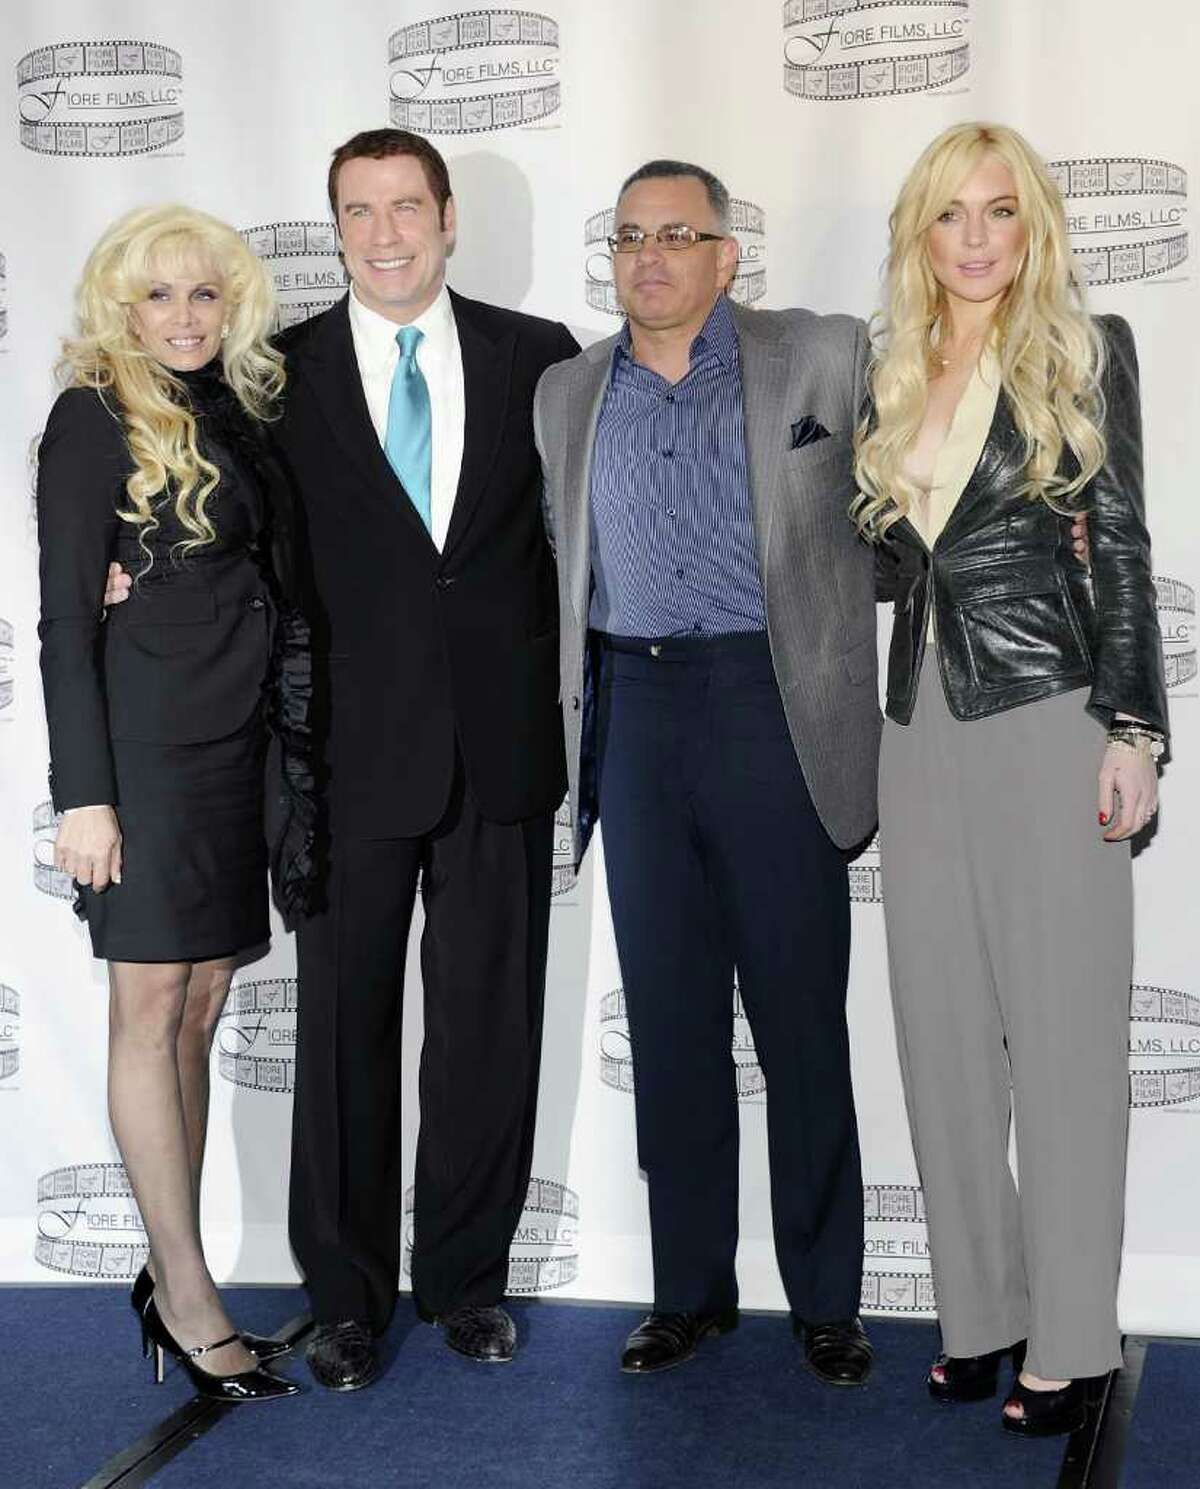 Victoria Gotti, author and daughter of the late John Gotti, left, actor John Travolta, John Gotti Jr. and actress Lindsay Lohan pose during a news conference for the film "Gotti: Three Generations", based on the life of John Gotti, at The Sheraton Hotel on Tuesday, April 12, 2011 in New York. (AP Photo/Evan Agostini)